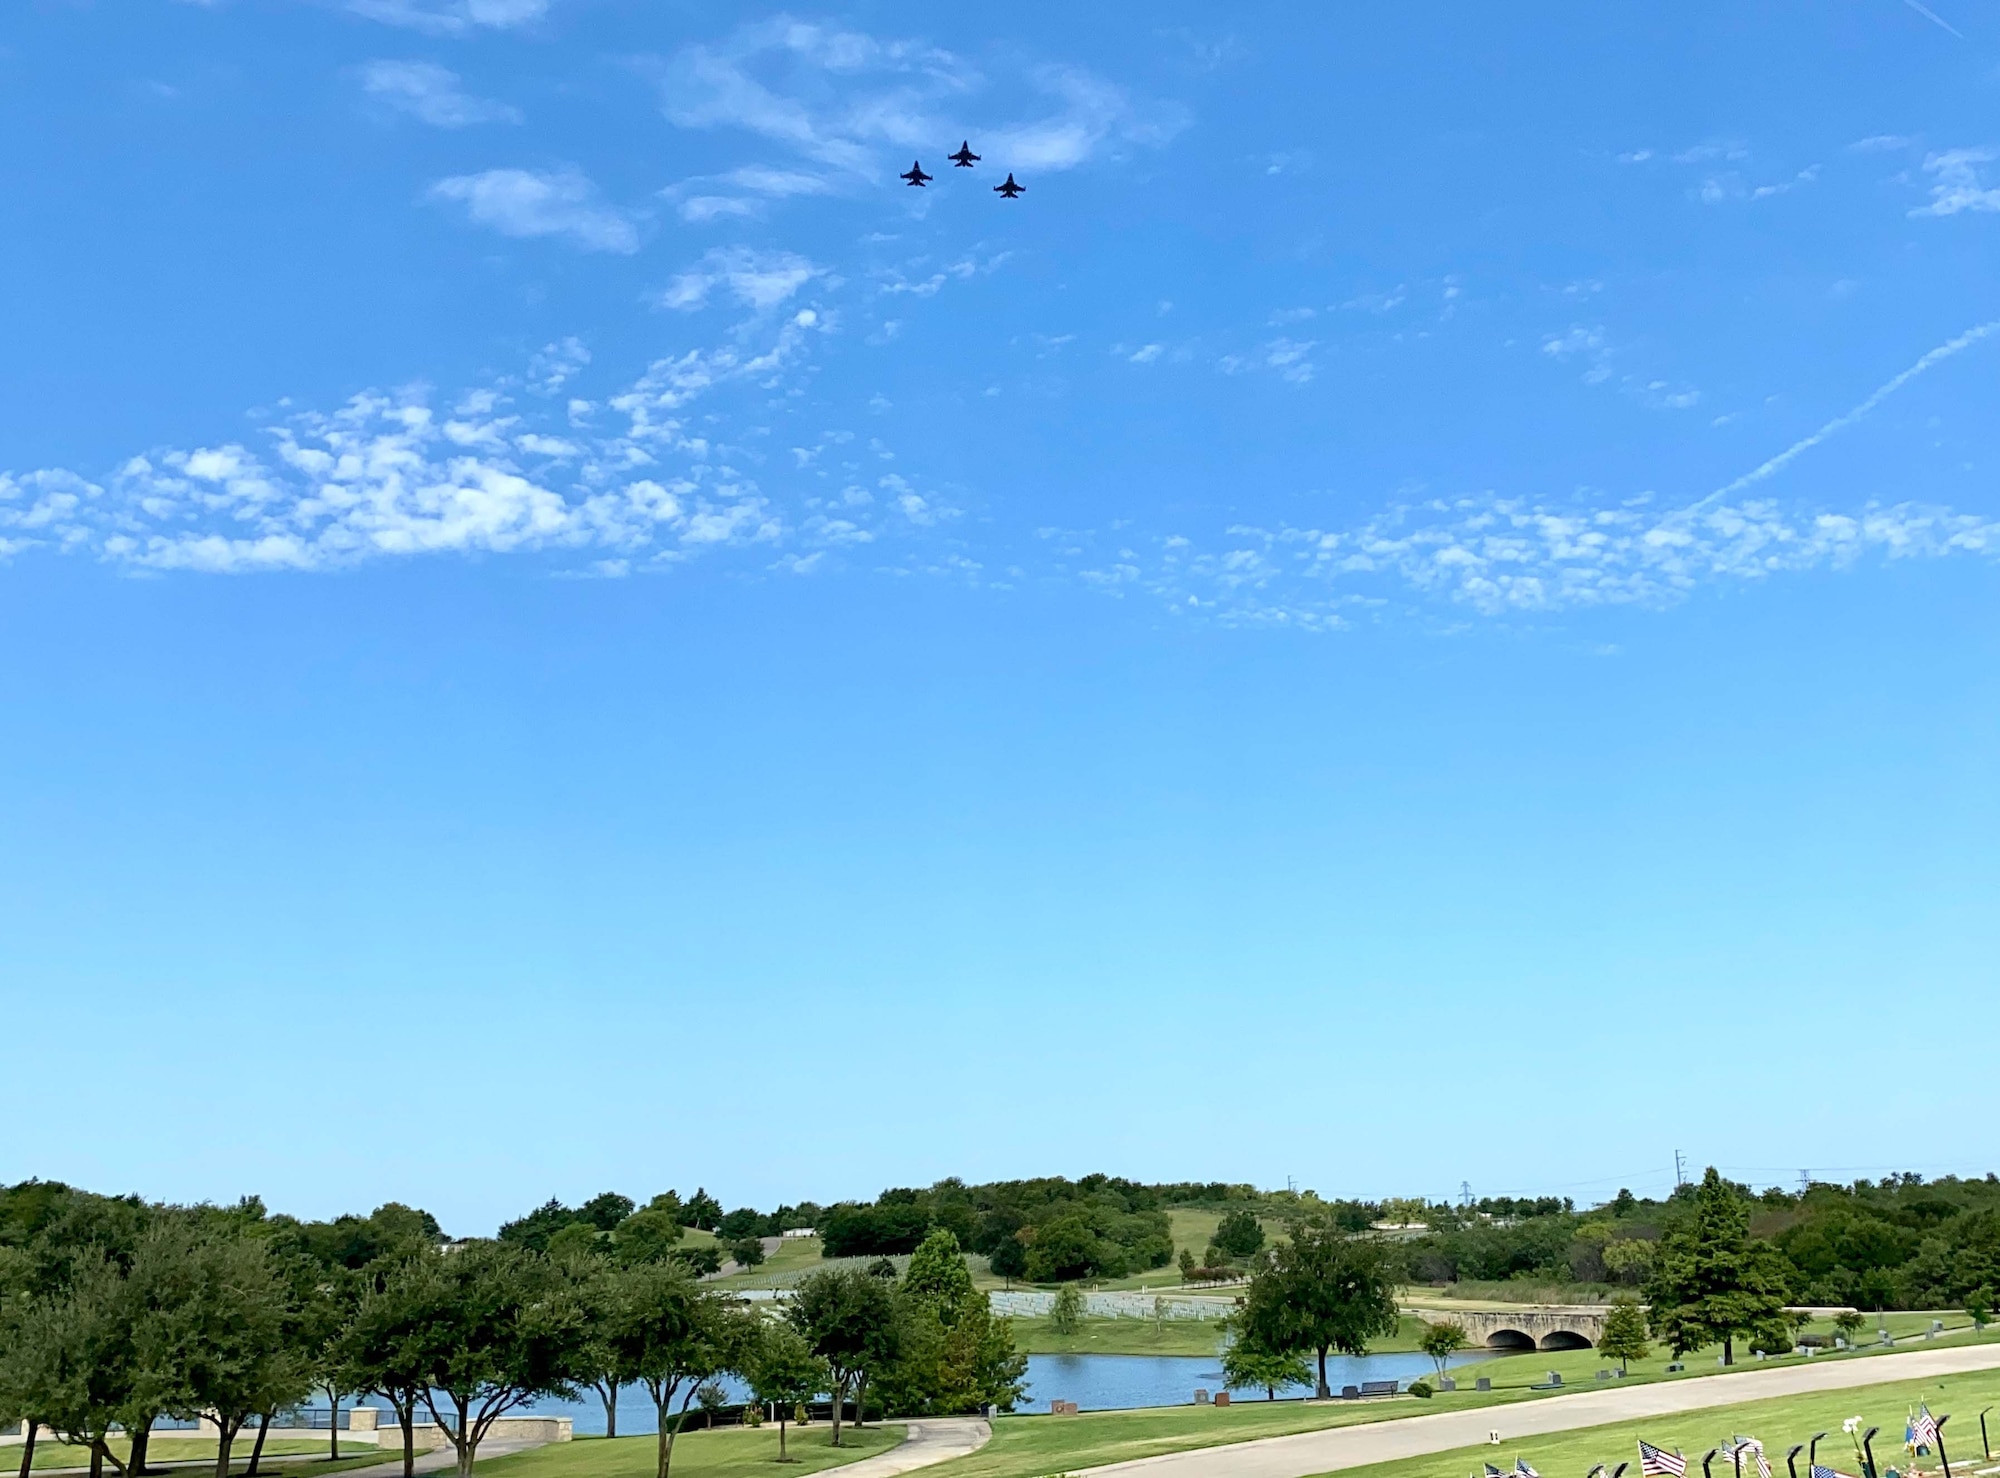 F-16 pilots assigned to the 457th Fighter Squadron, 301st Fighter Wing, performed a memorial flyover at Dallas Fort Worth National Cemetery to honor POW and F-16 program founder, Brigadier General Lyle Cameron on August 7. They flew a "missing man” formation flyover for his remaining family members, friends and those in attendance. (U.S. Air Force photo by Capt. Jessica Gross)